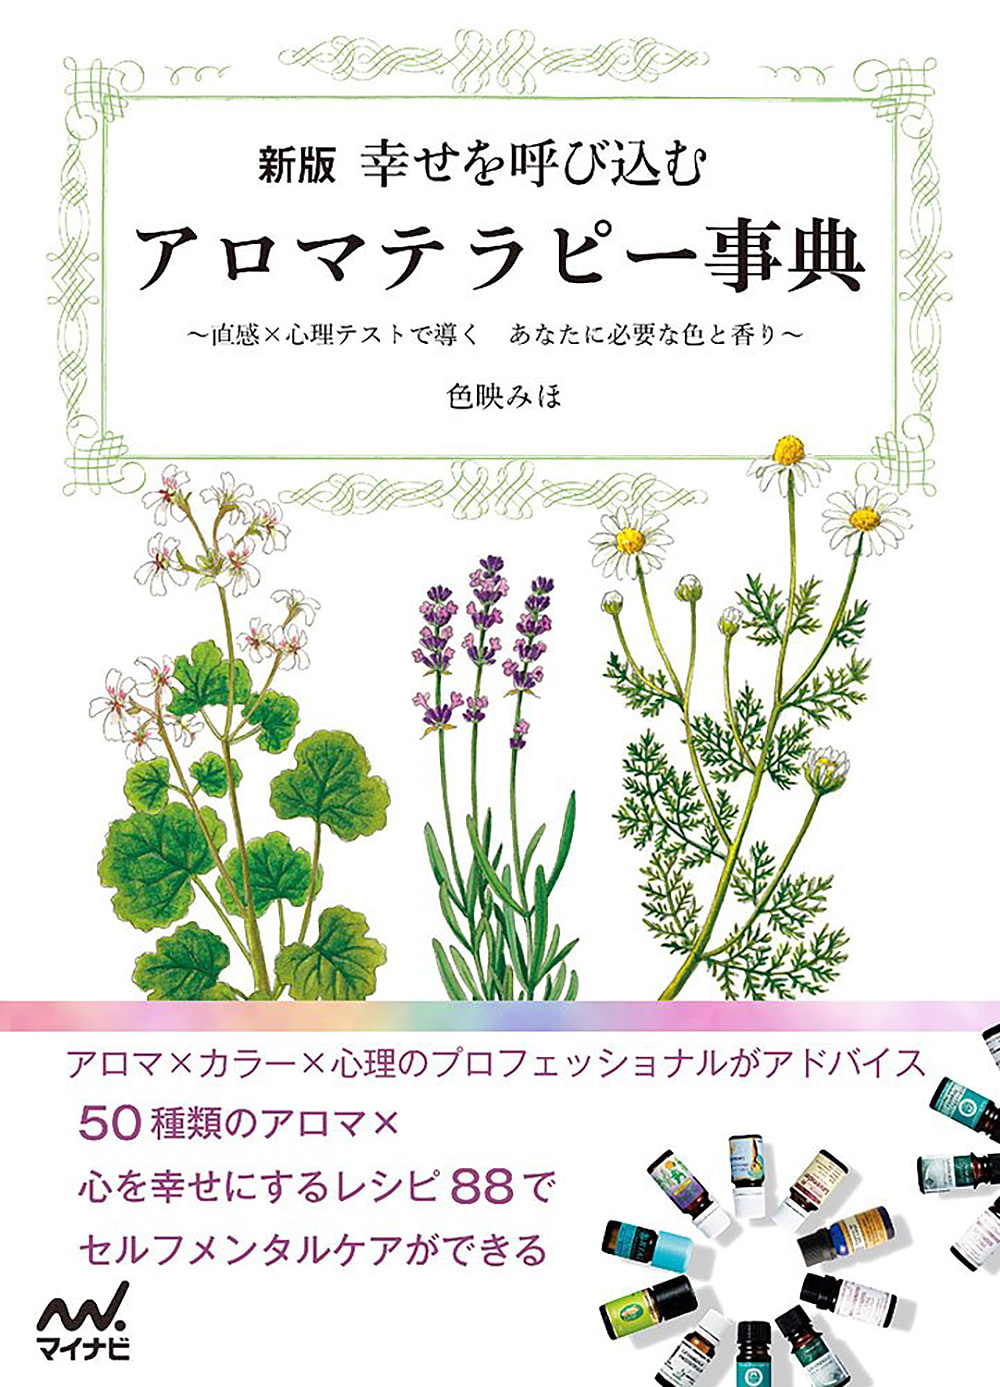 Psycholo　幸せを呼び込むアロマテラピー事典　の通販　New　Happiness-Intuition　Encyclopedia　Edition:　Aromatherapy　x　that　Brings